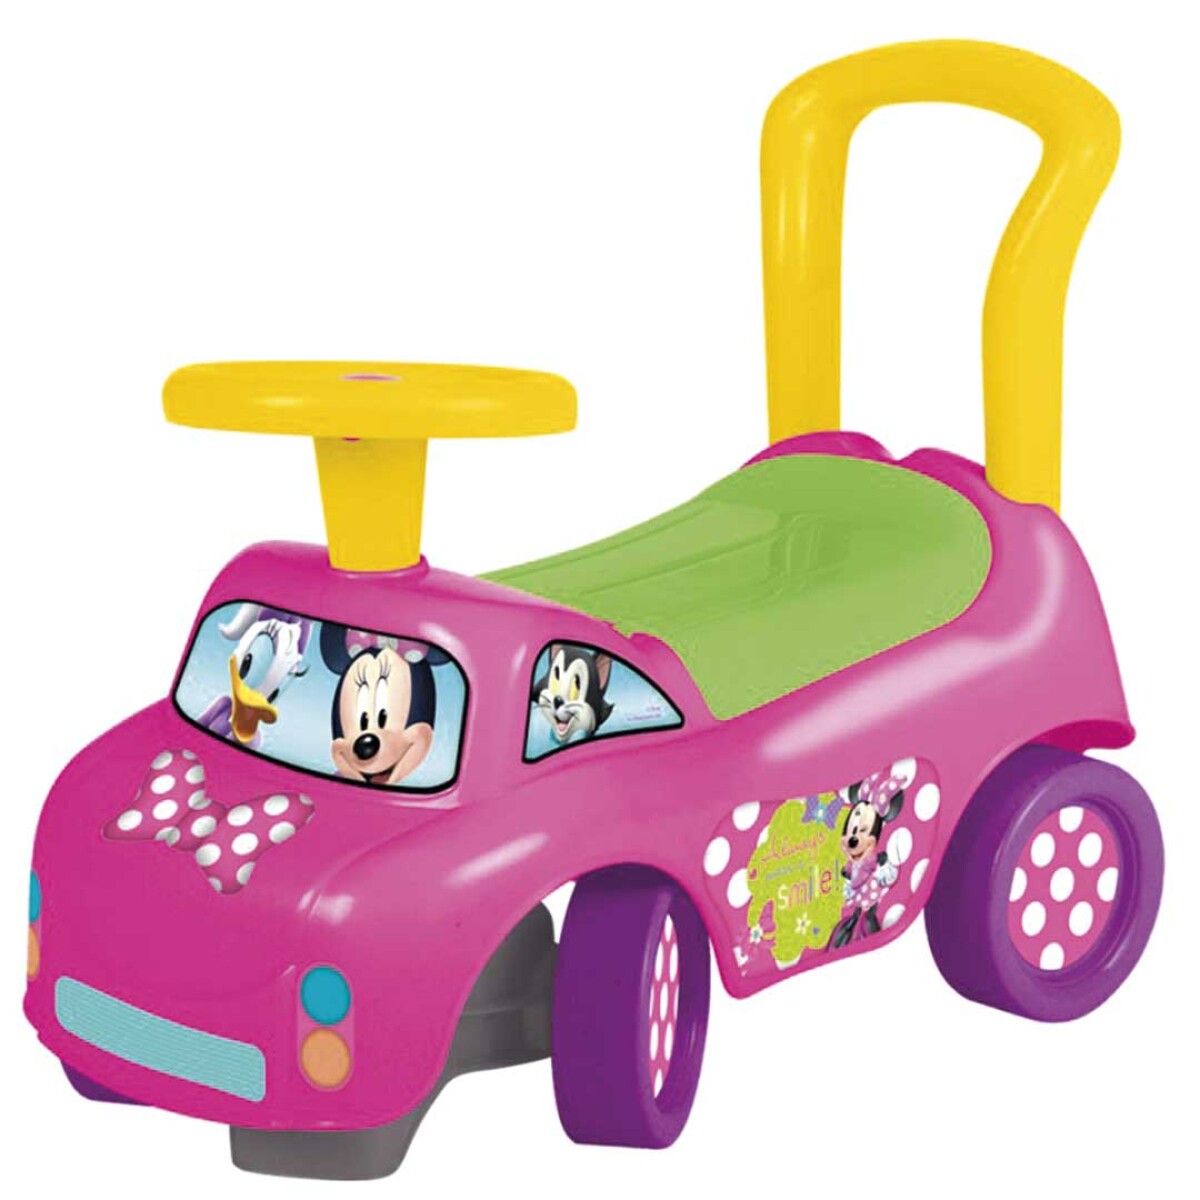 Buggy Minnie Mouse con Guia Disney - 001 